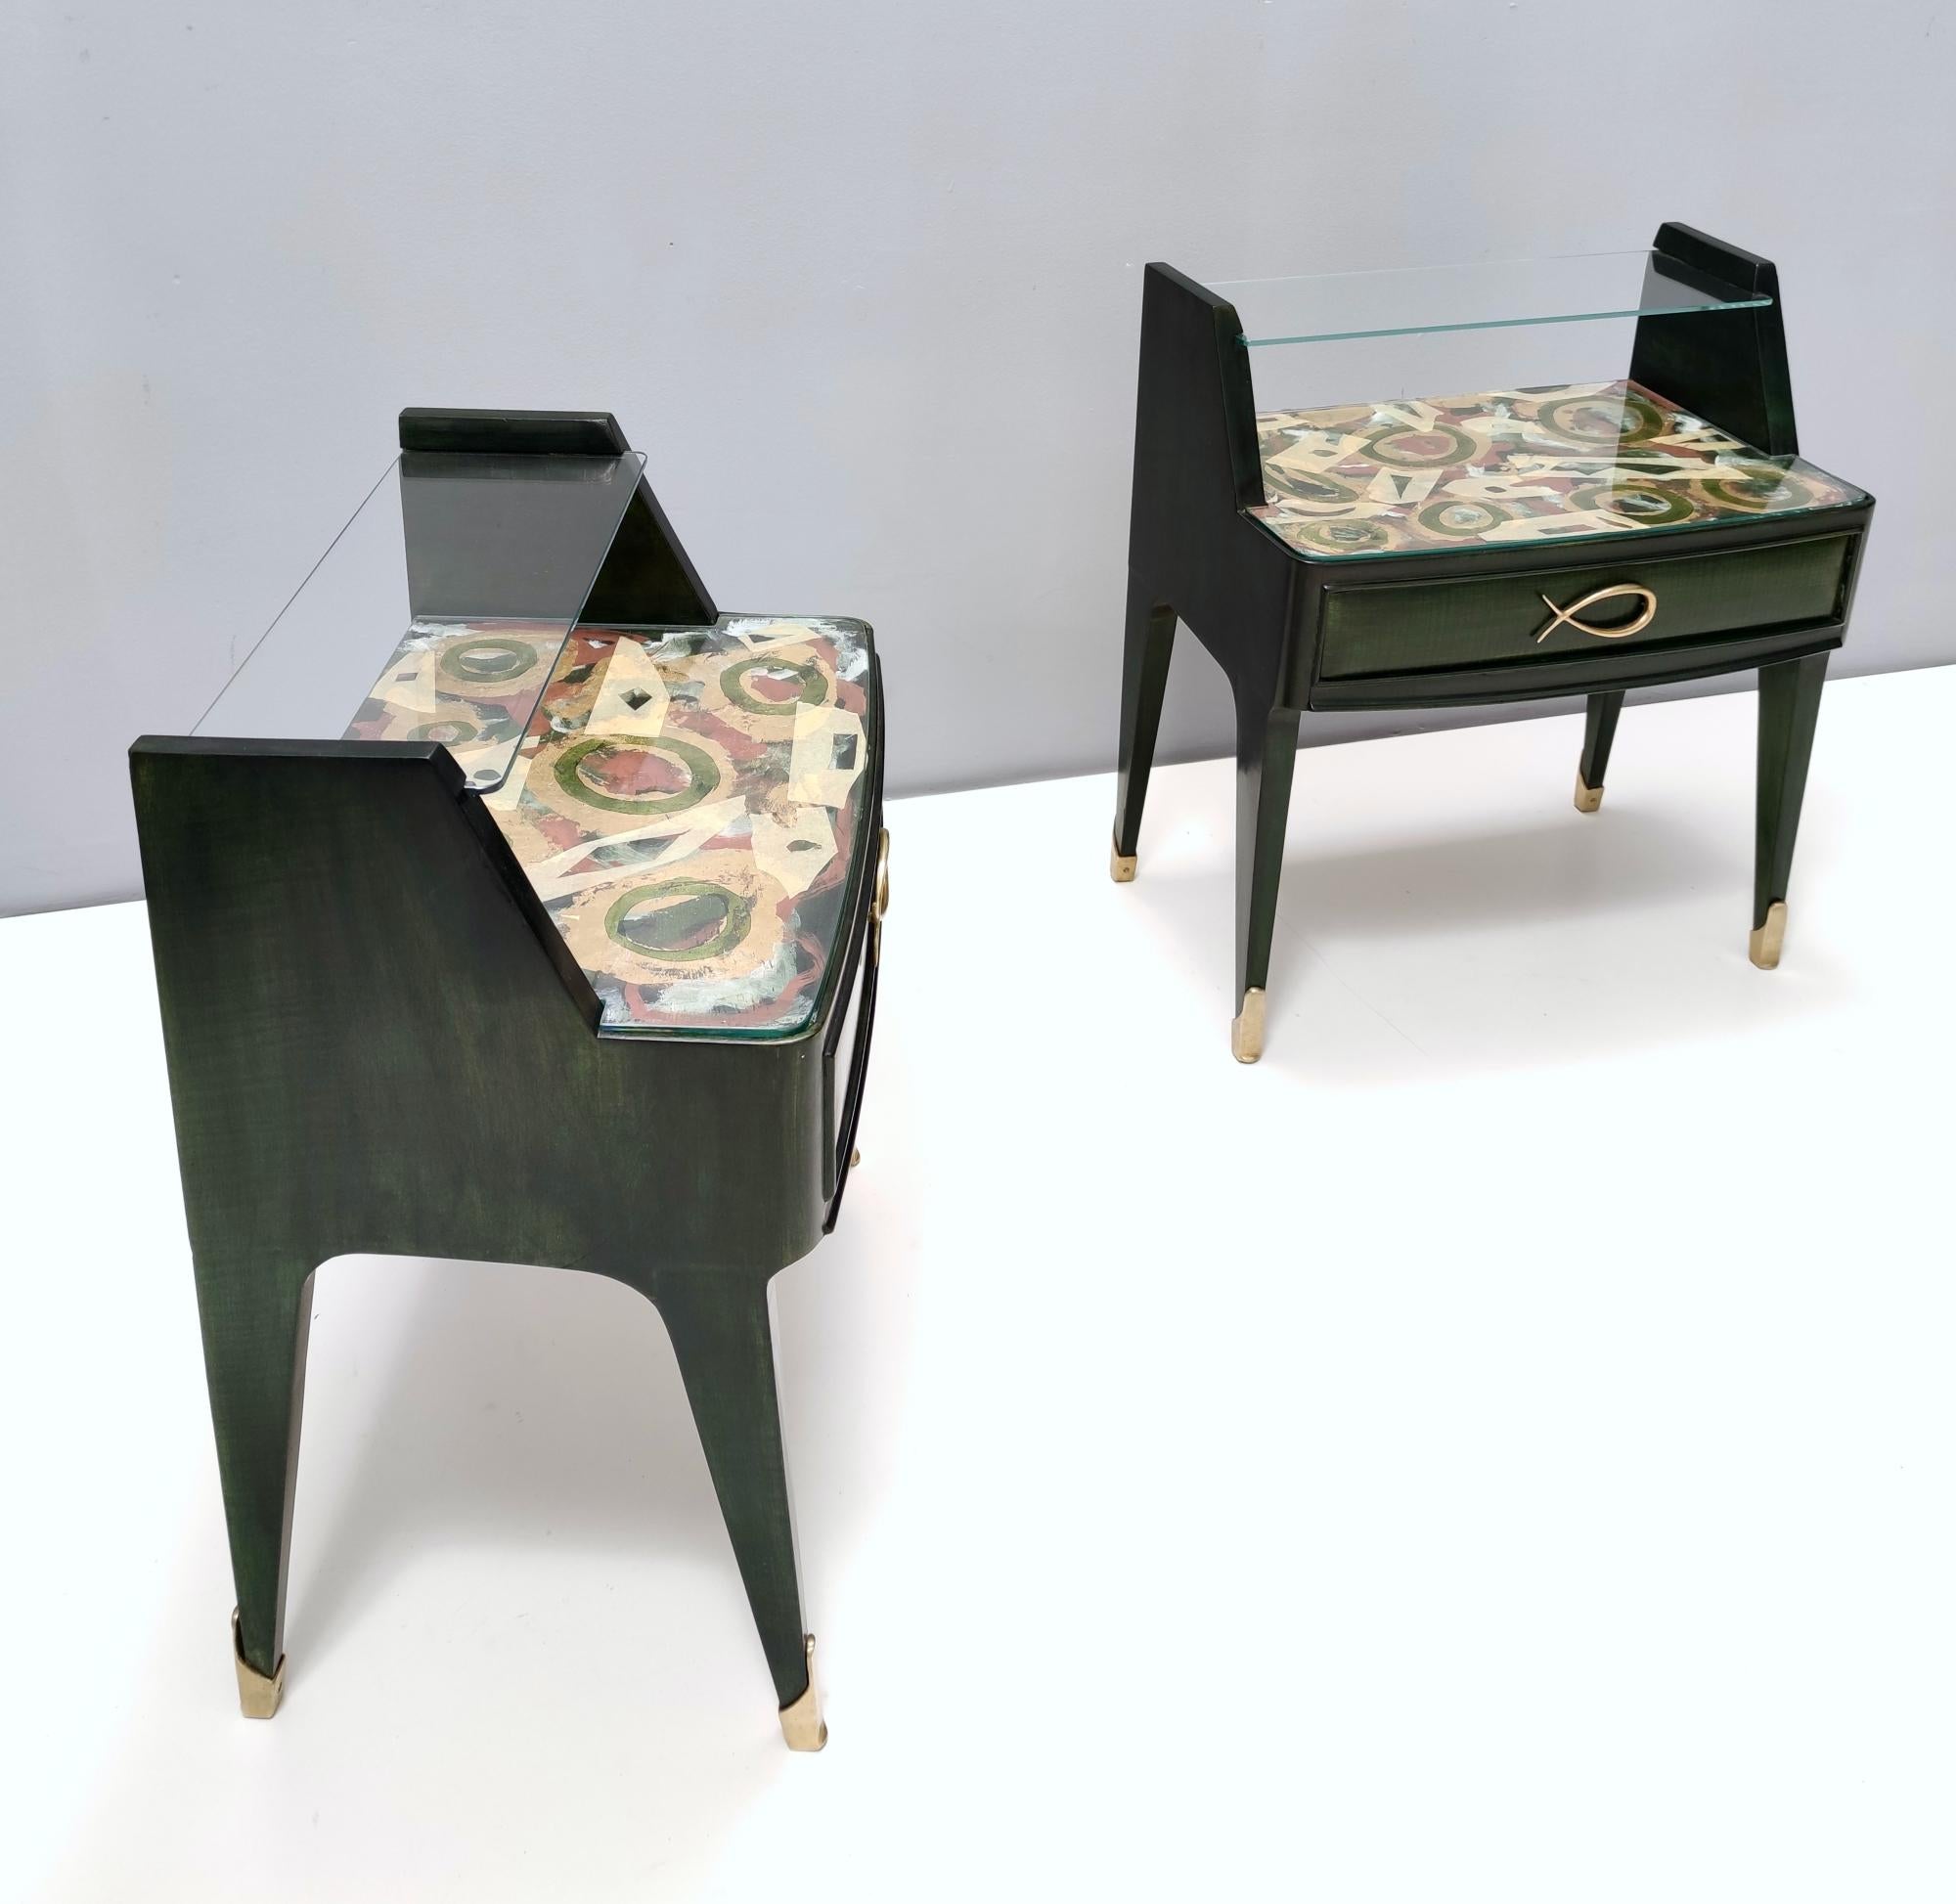 Mid-Century Modern Pair of Dark Green Wooden Nightstands in 1950s Style with a Decorated Top, Italy For Sale